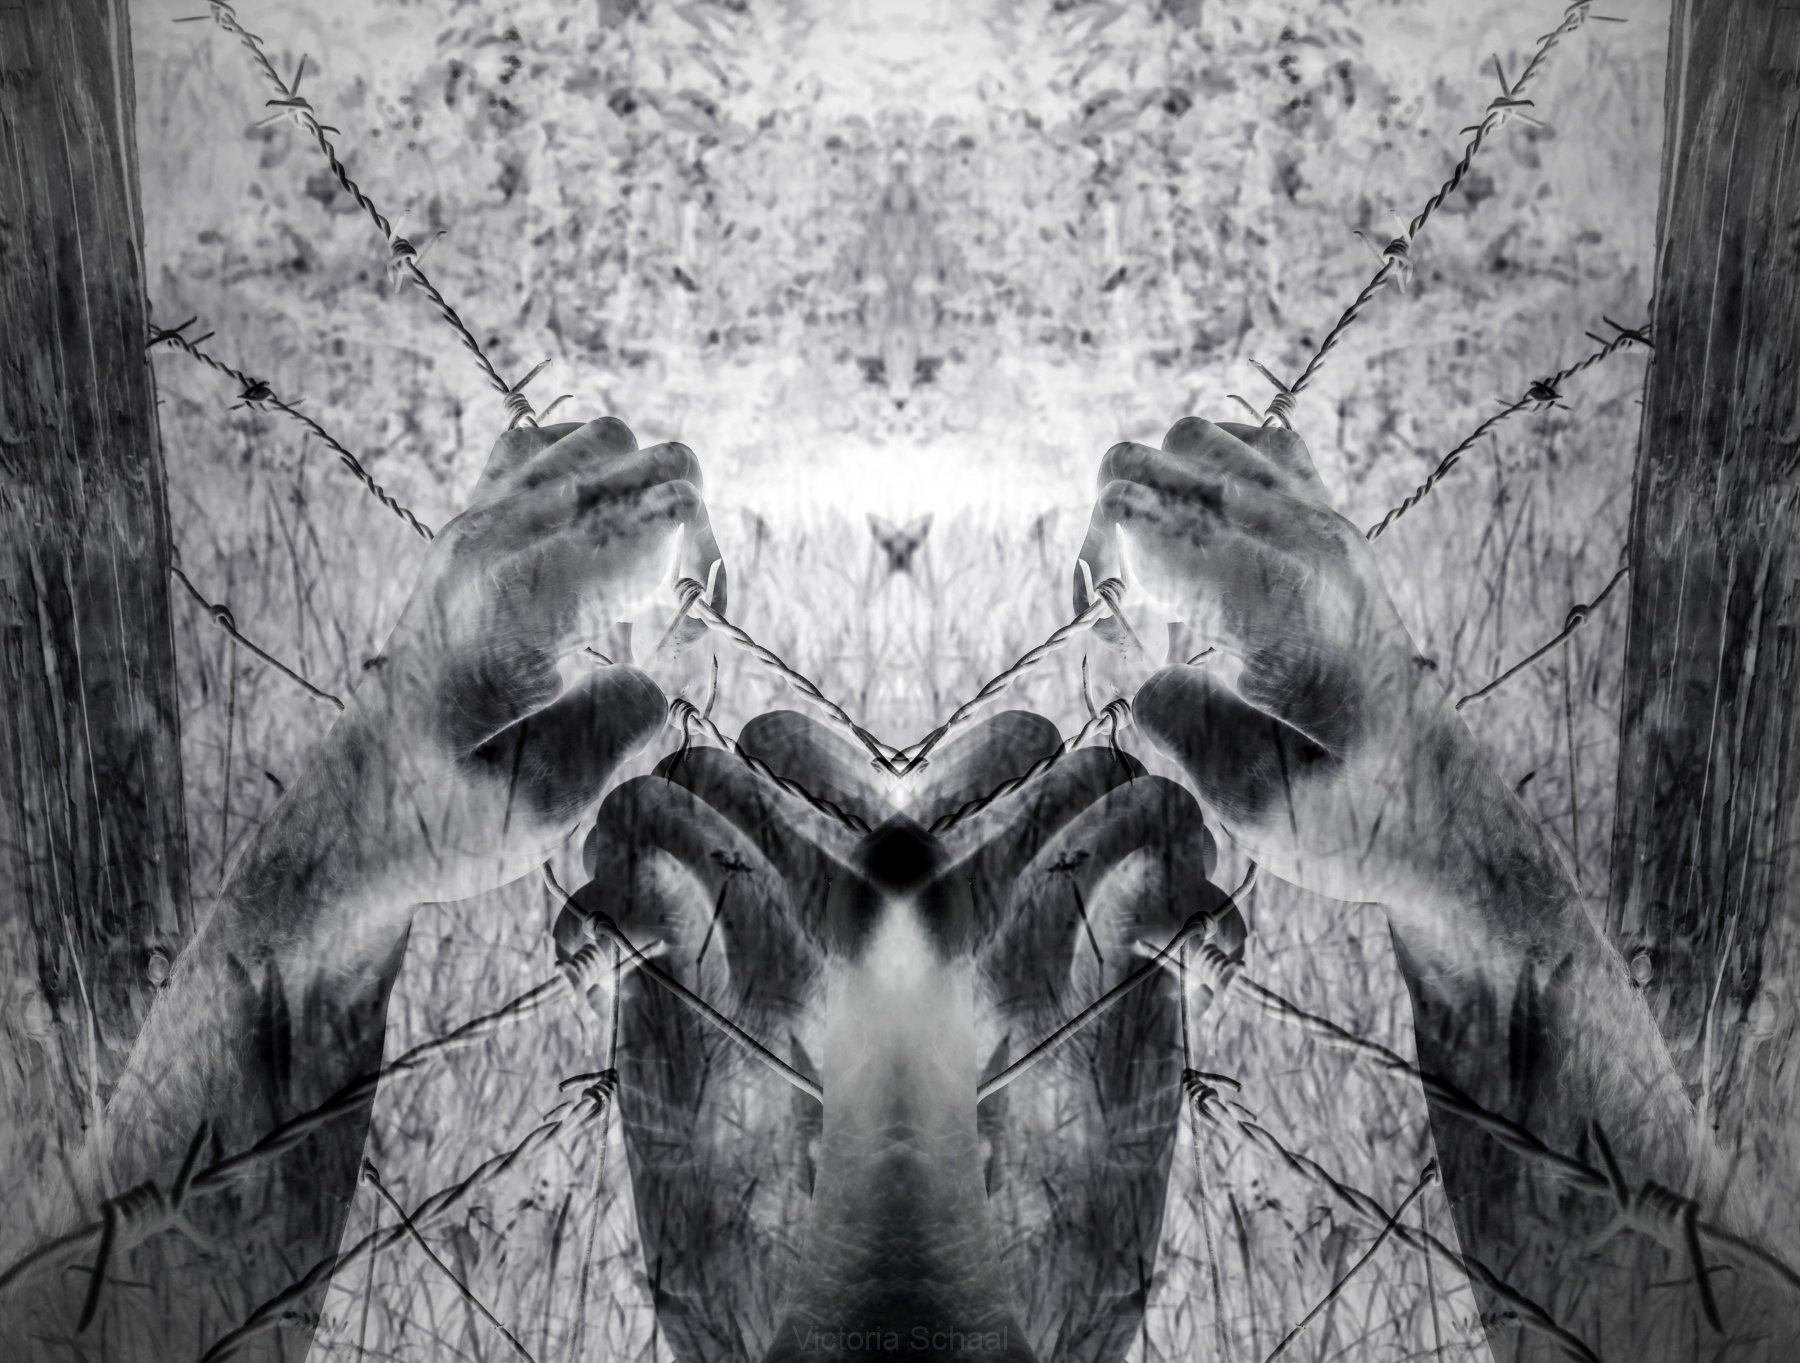 Artistic surreal tortured hands grasping desperately barbed wire (infrared)